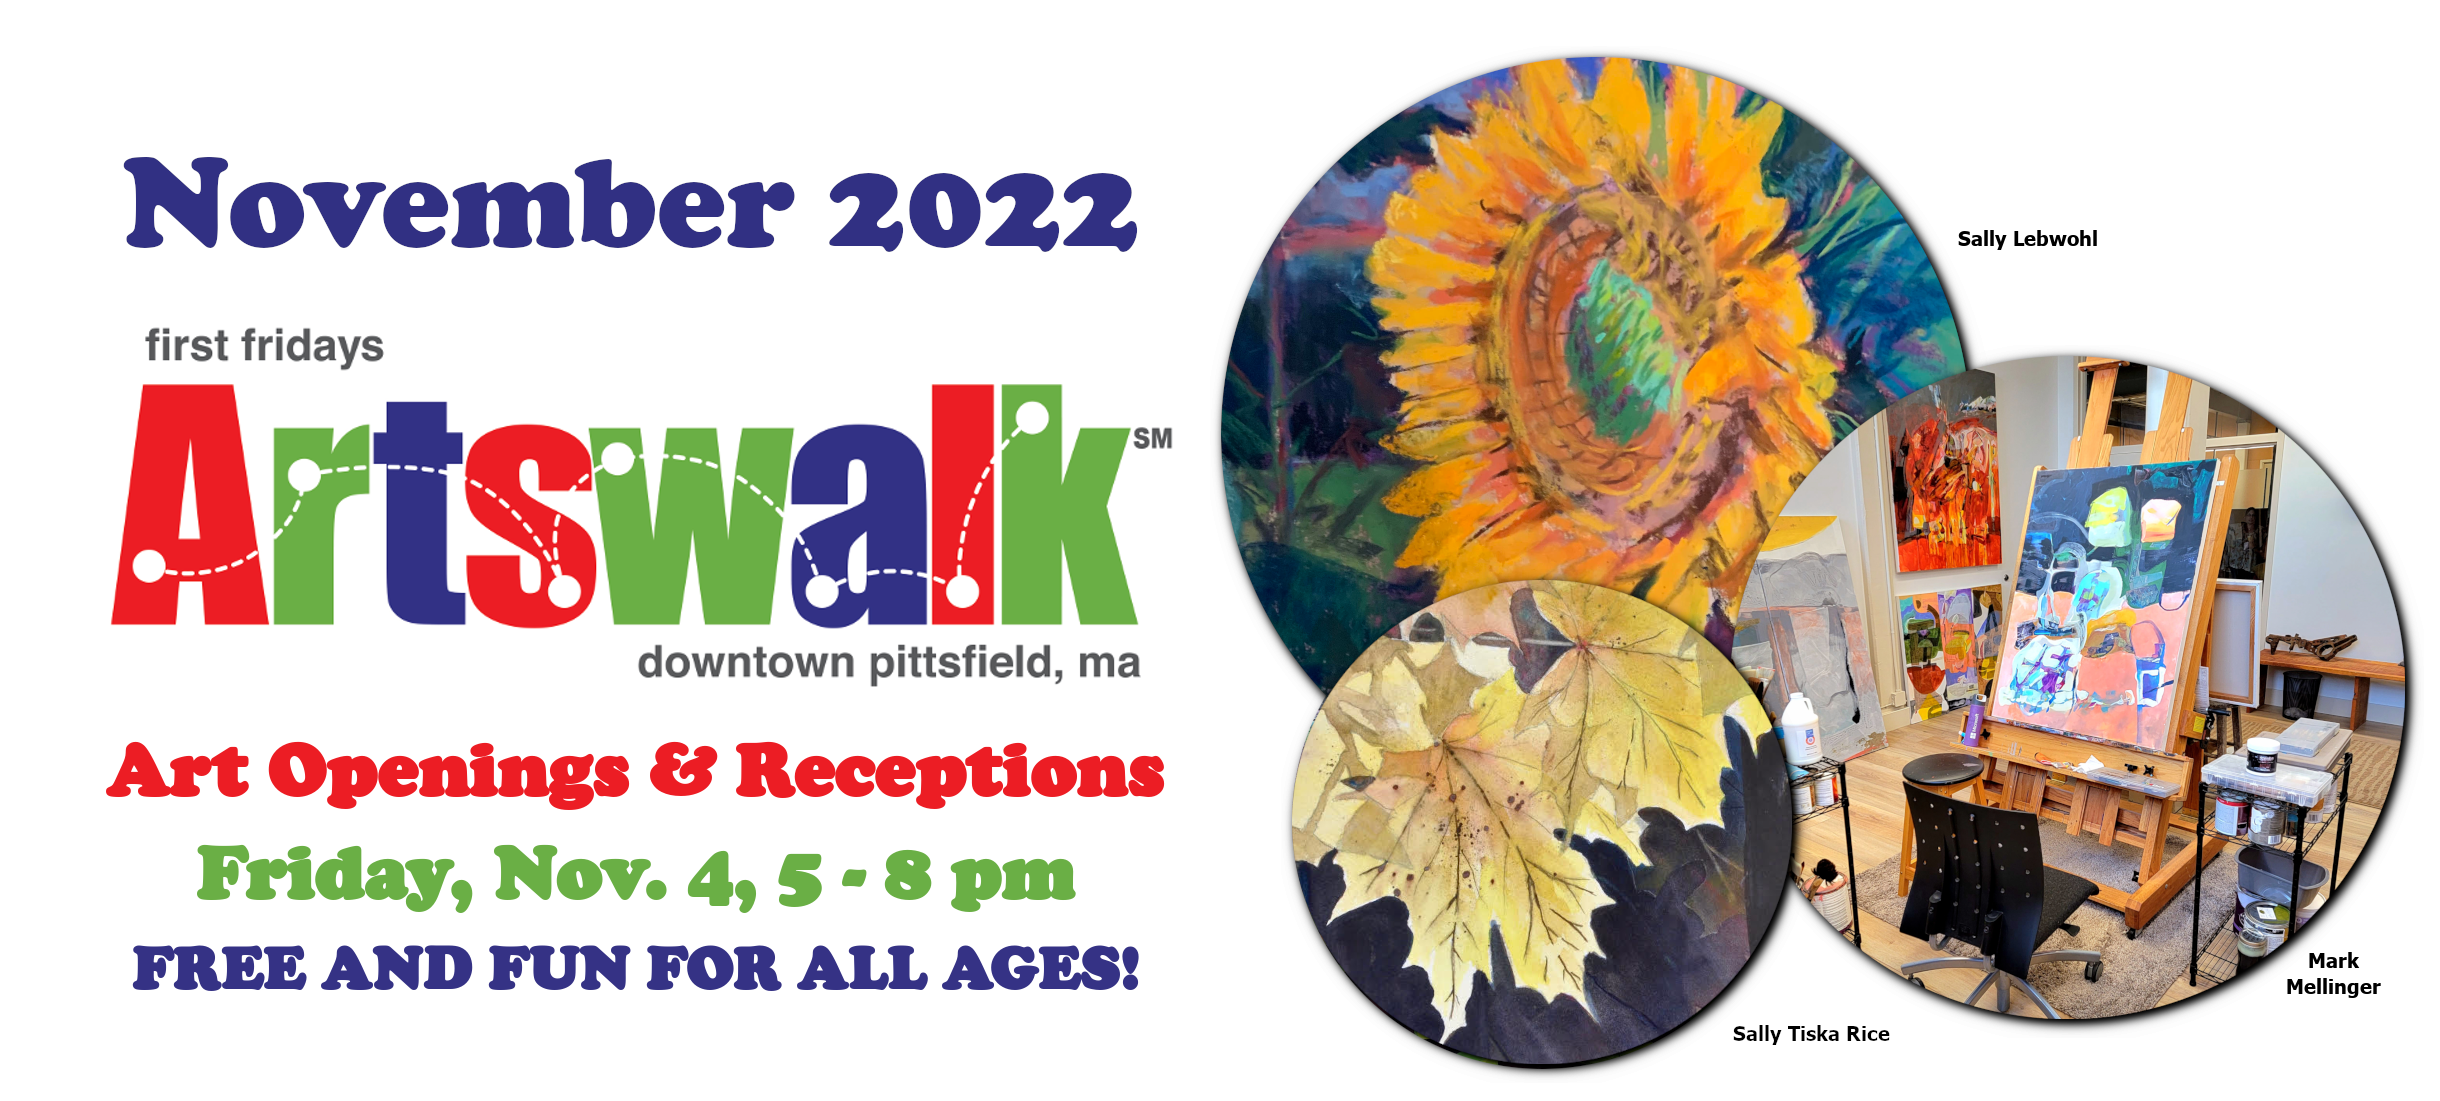 November 4 First Fridays Artswalk, 5 to 8 pm, Downtown Pittsfield MA